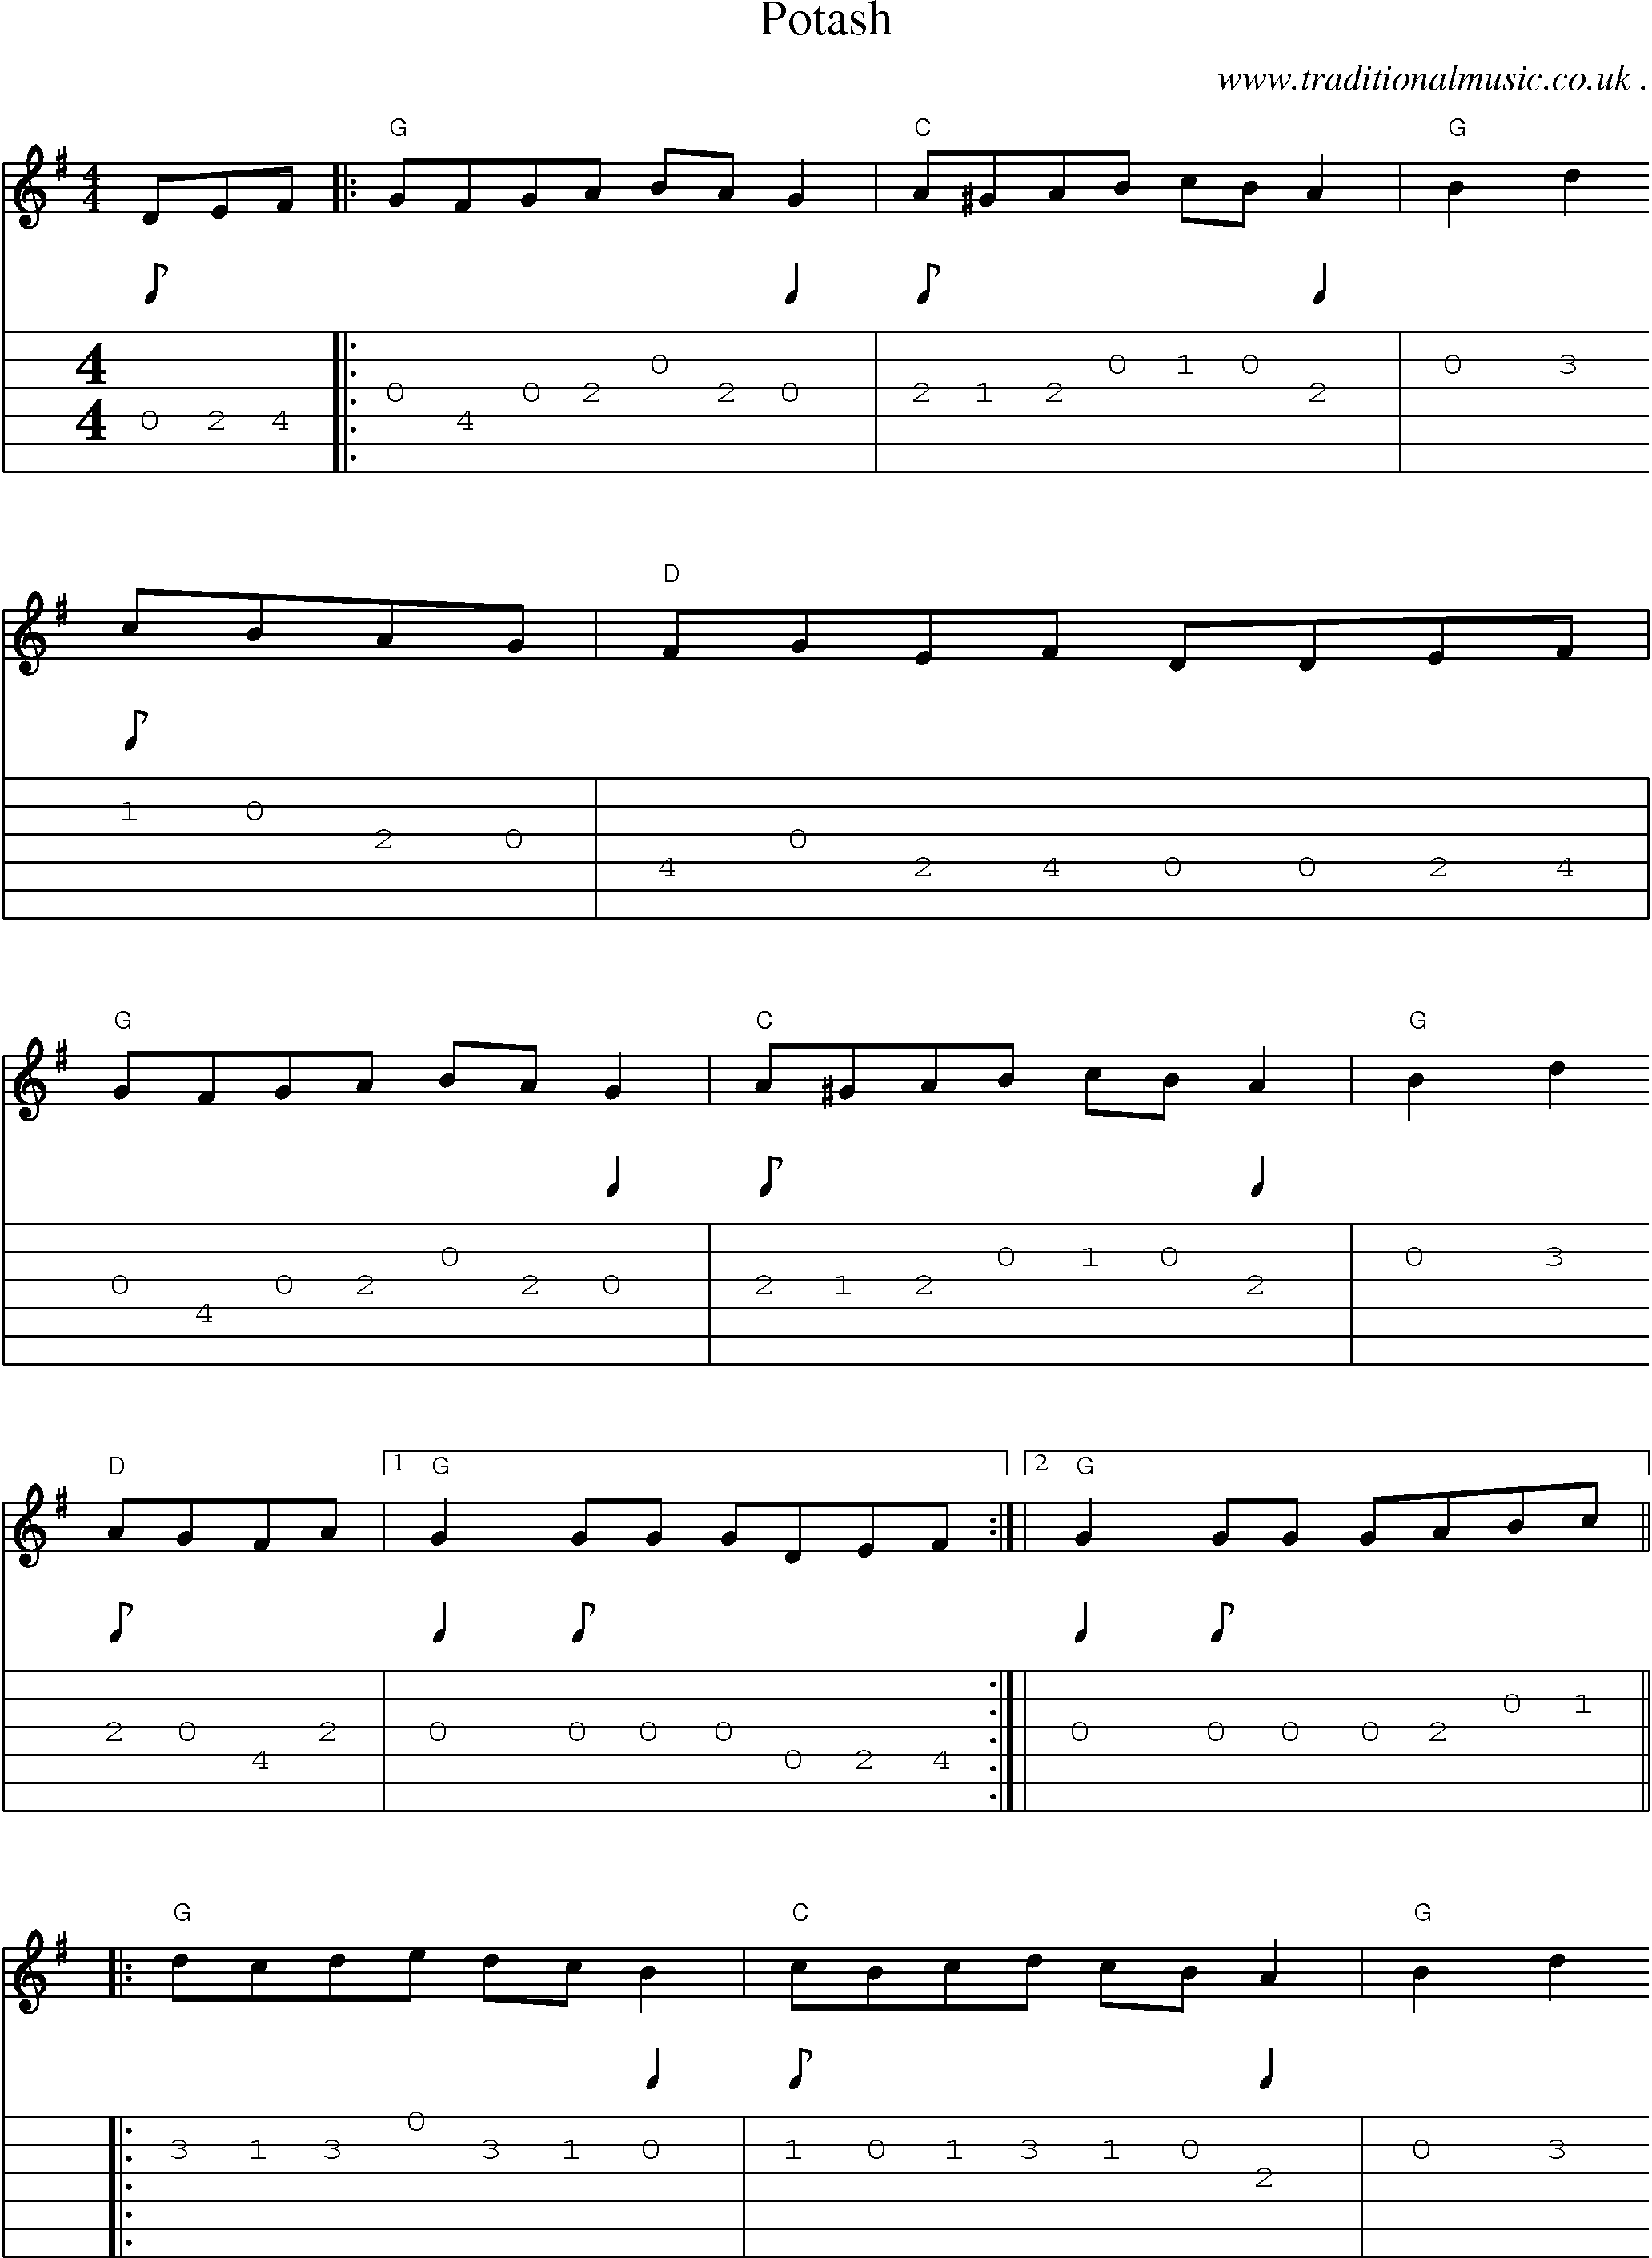 Sheet-music  score, Chords and Guitar Tabs for Potash